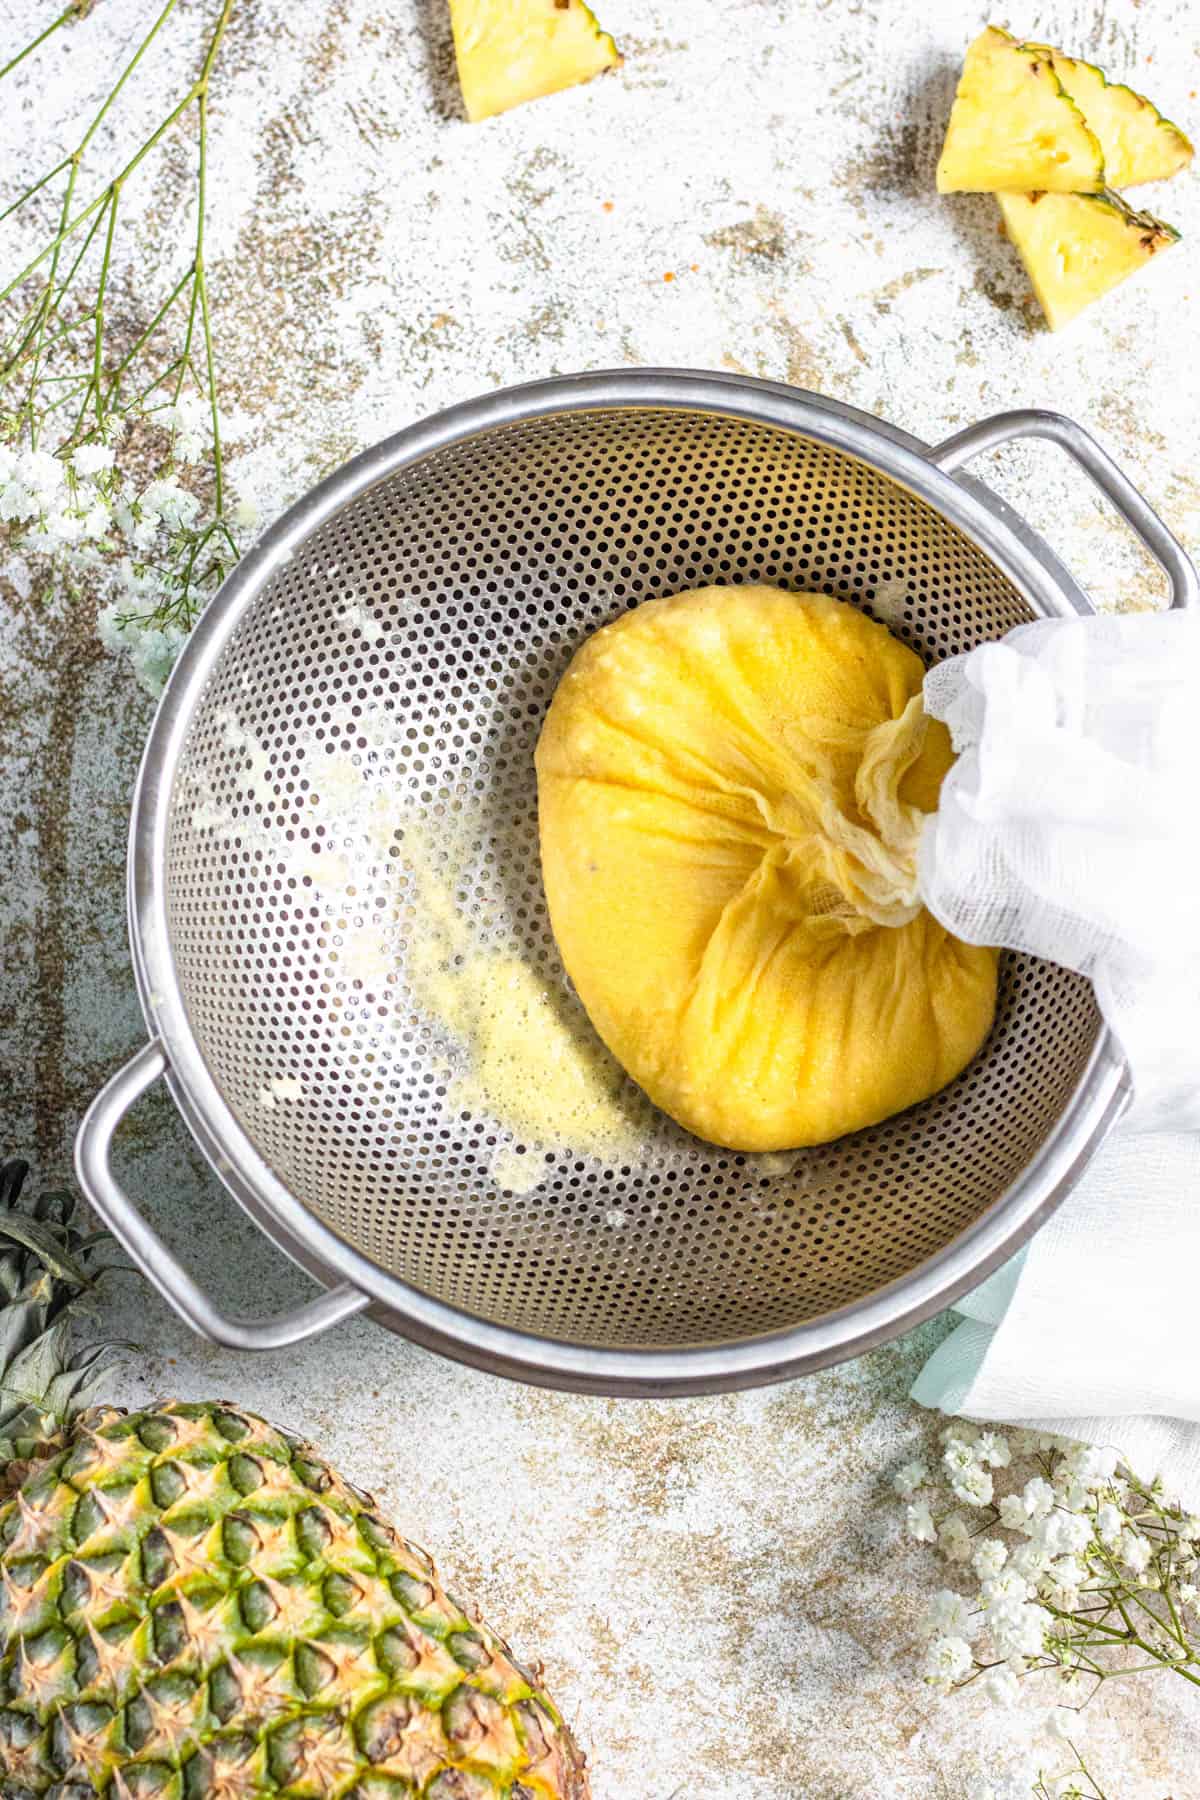 cheesecloth corners pulled together to strain pineapple juice